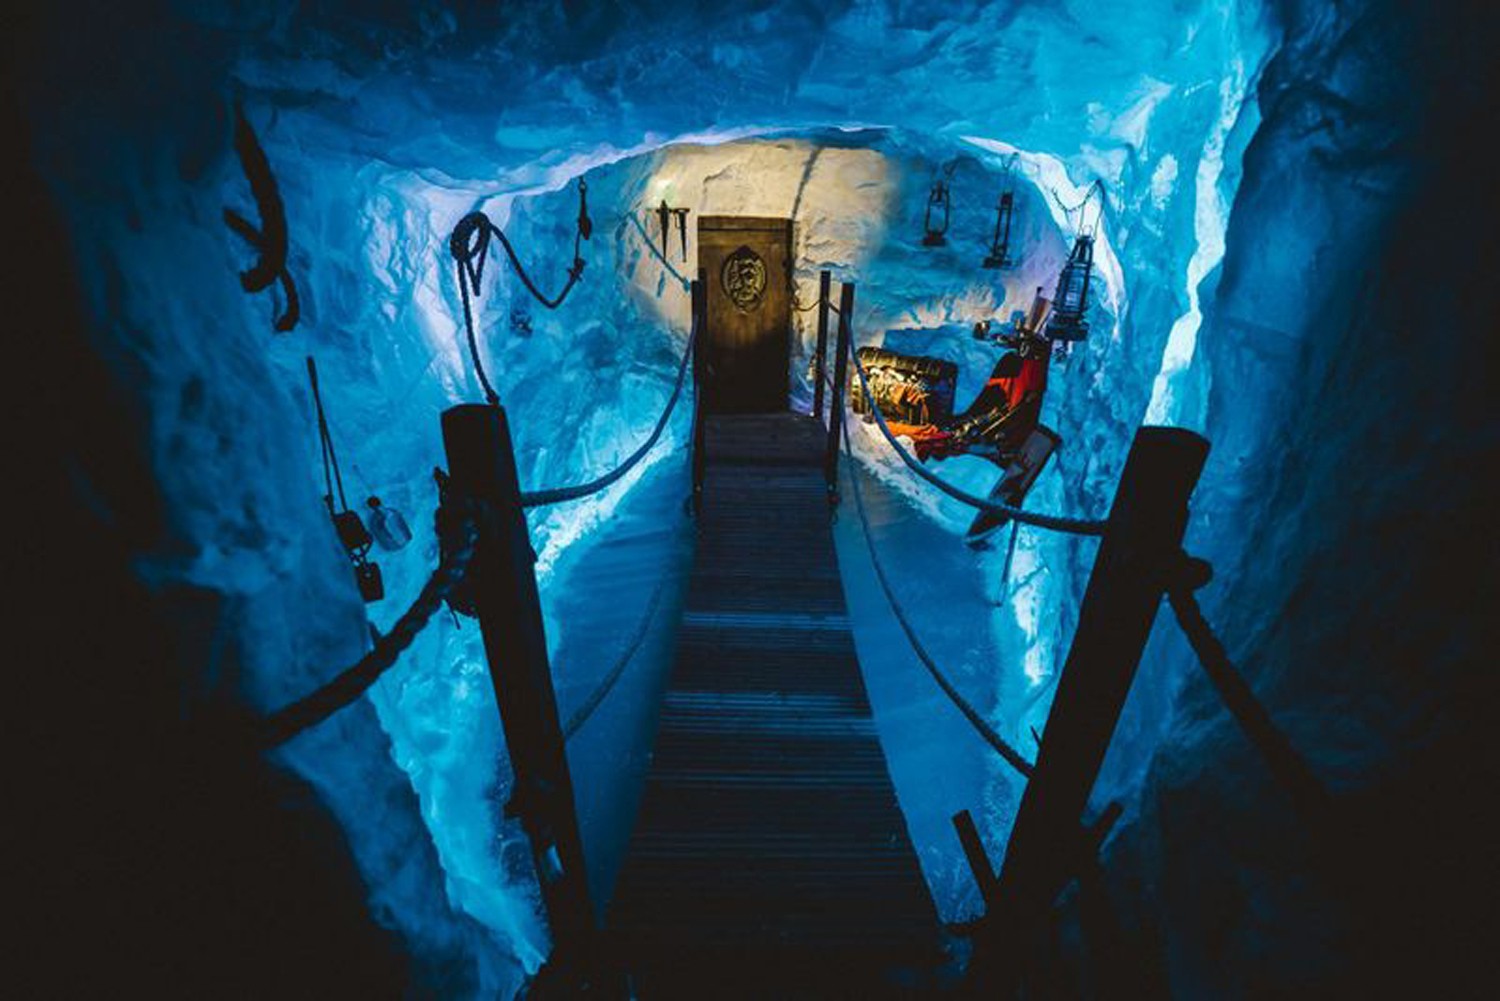 Backyard Cinema Artificial Ice Cave, Indoor Fake Ice Cave Special Effects Set Up for Events UK, FX Live